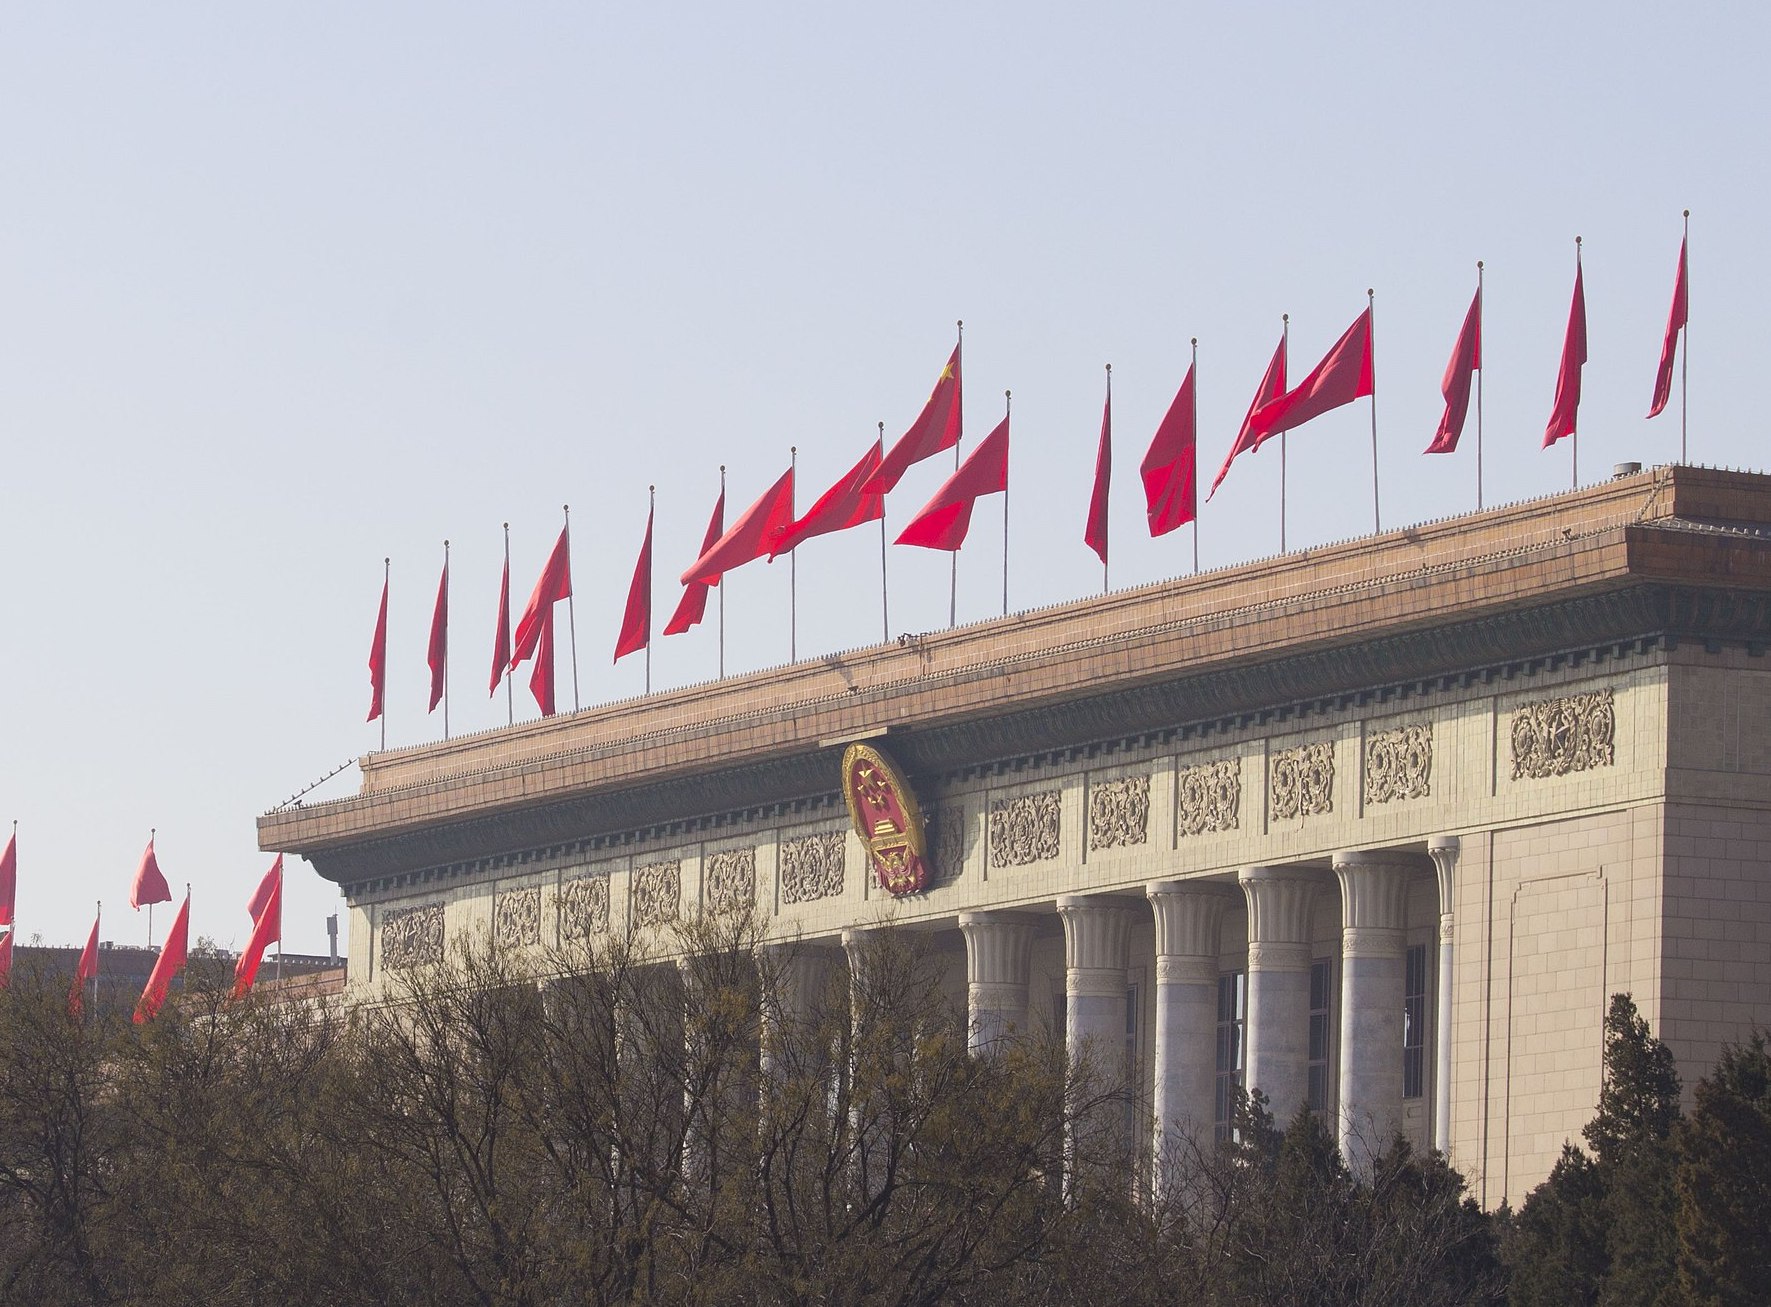 Great Hall of the People in China with more than a dozen flags flying against a sky without clouds